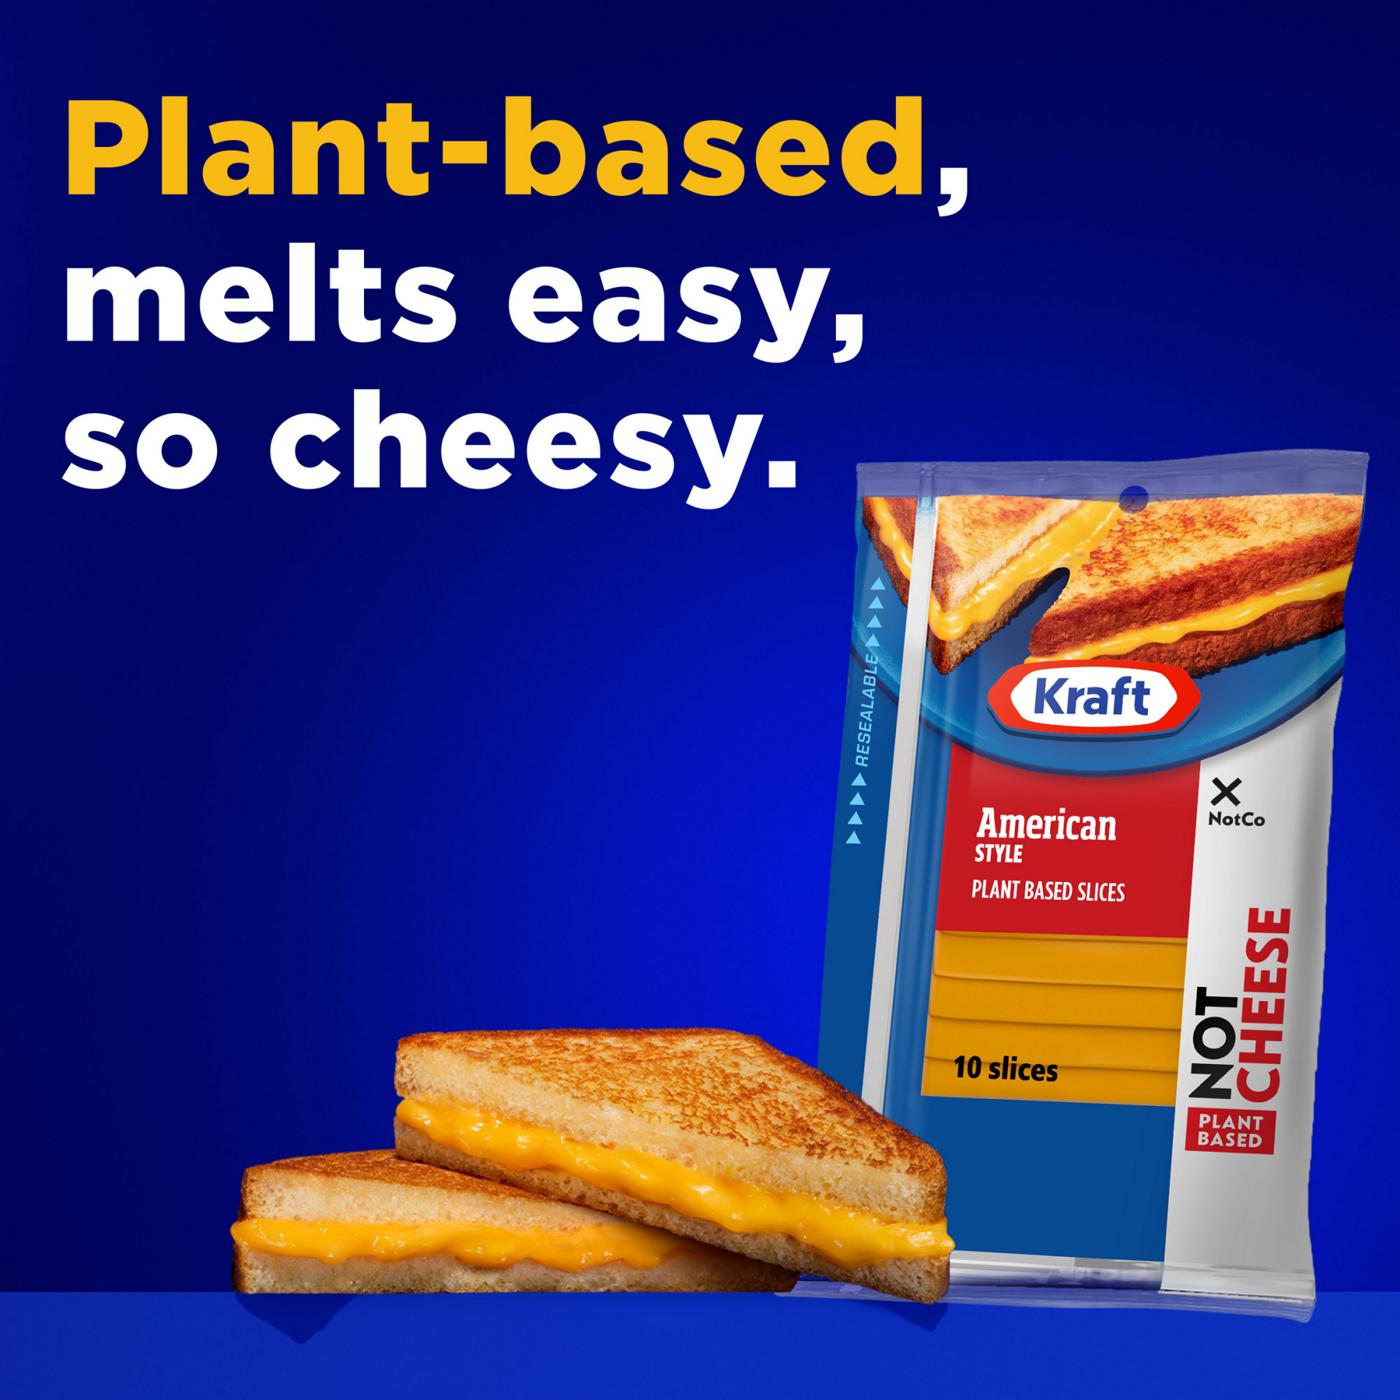 Looking for Kraft's Vegan Cheese Singles? Here Is Where to Find Them.